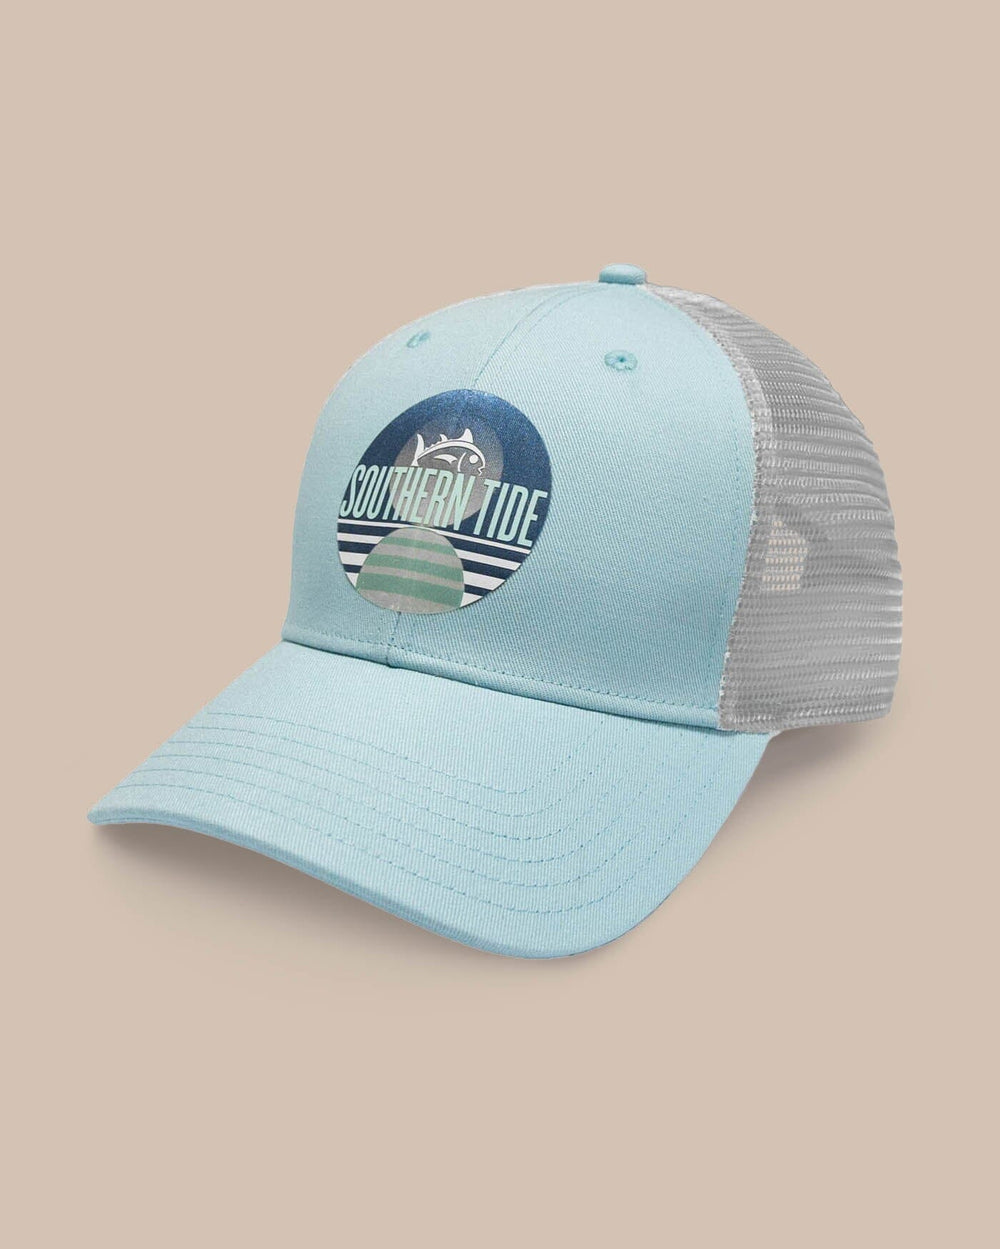 The front view of the Southern Tide Skipjack and Stripes Trucker Hat by Southern Tide - Light Blue